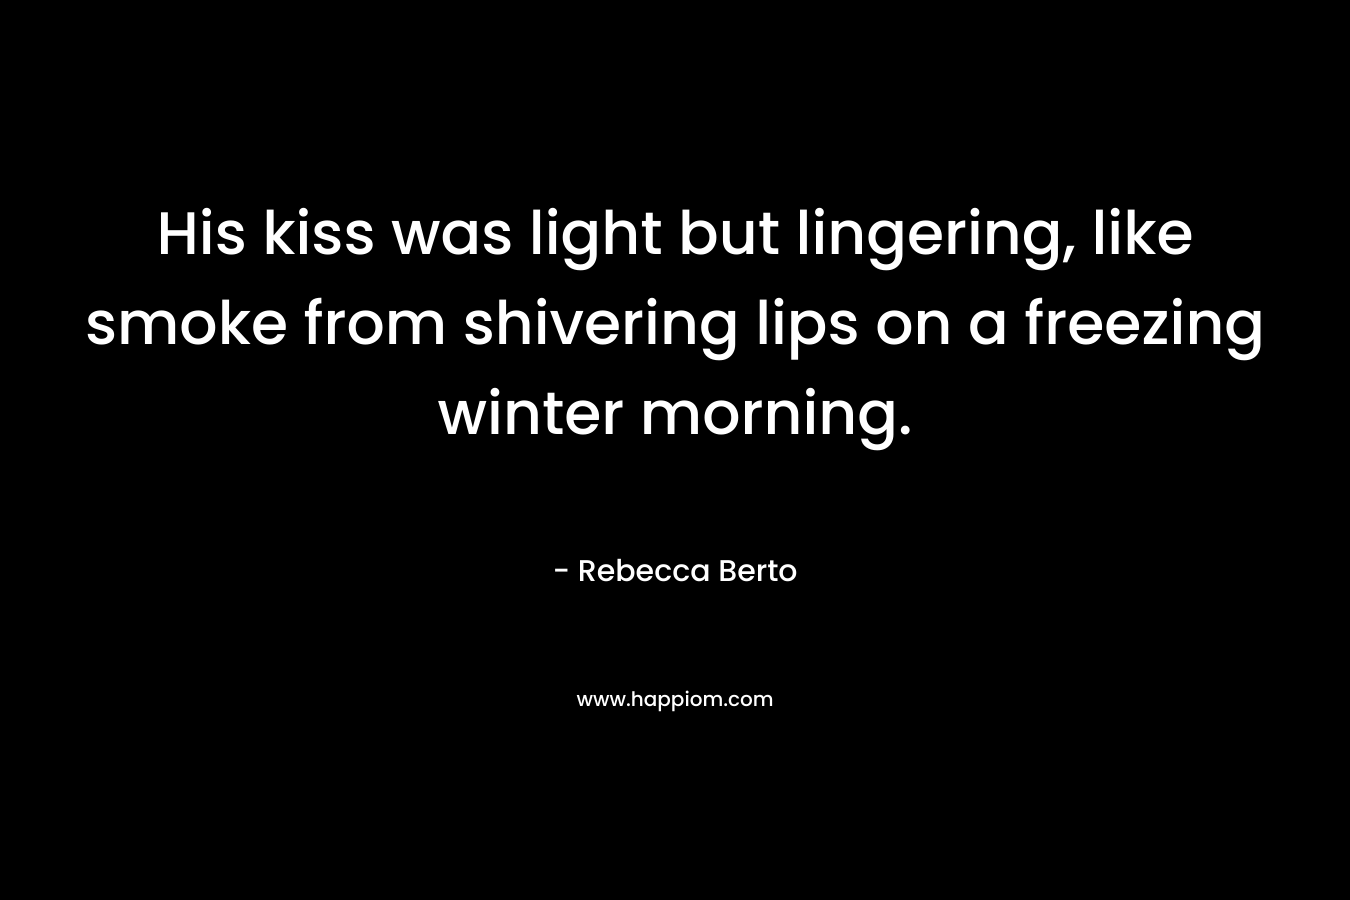 His kiss was light but lingering, like smoke from shivering lips on a freezing winter morning. – Rebecca Berto